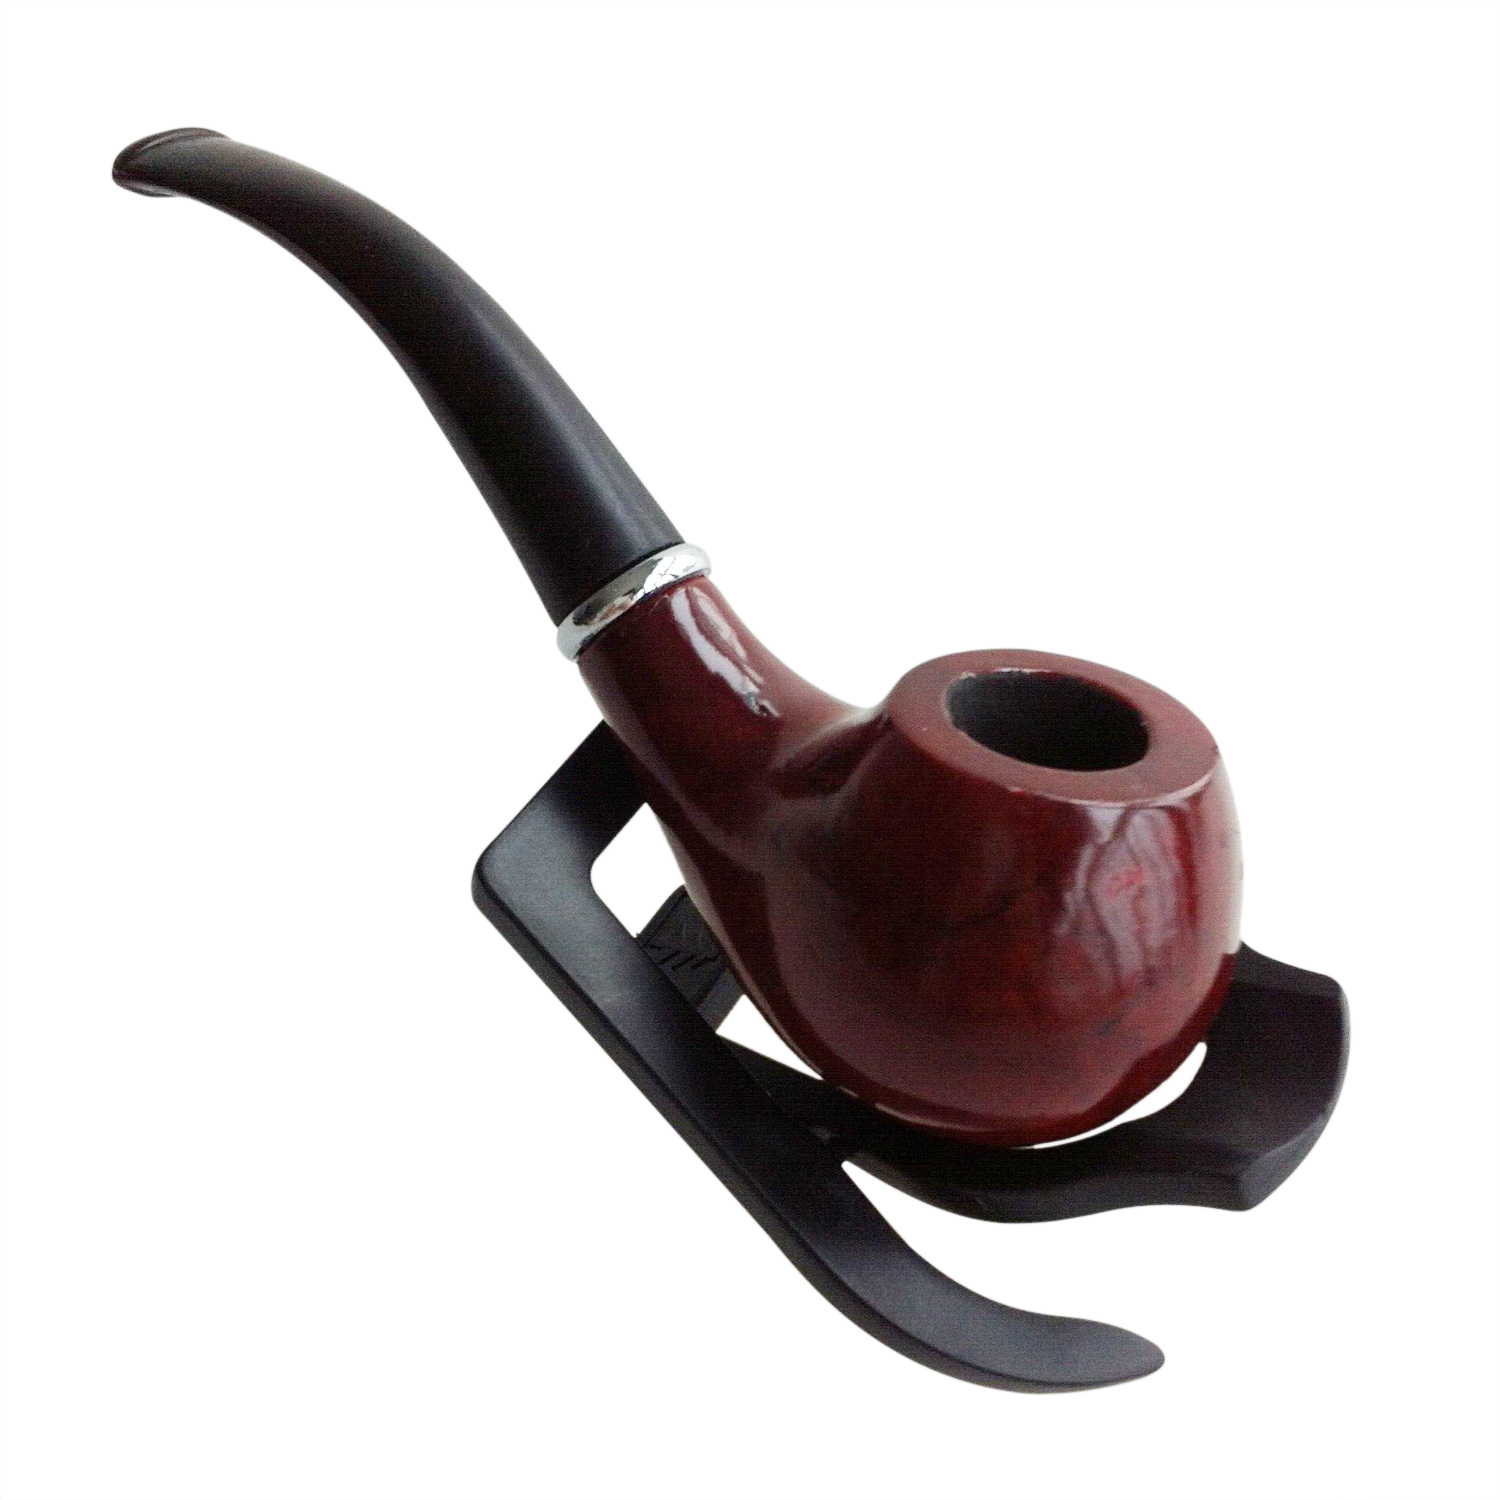 Bestselling Cool Durable Wooden Pipe Smoking Tobacco Cigar Pipes ...